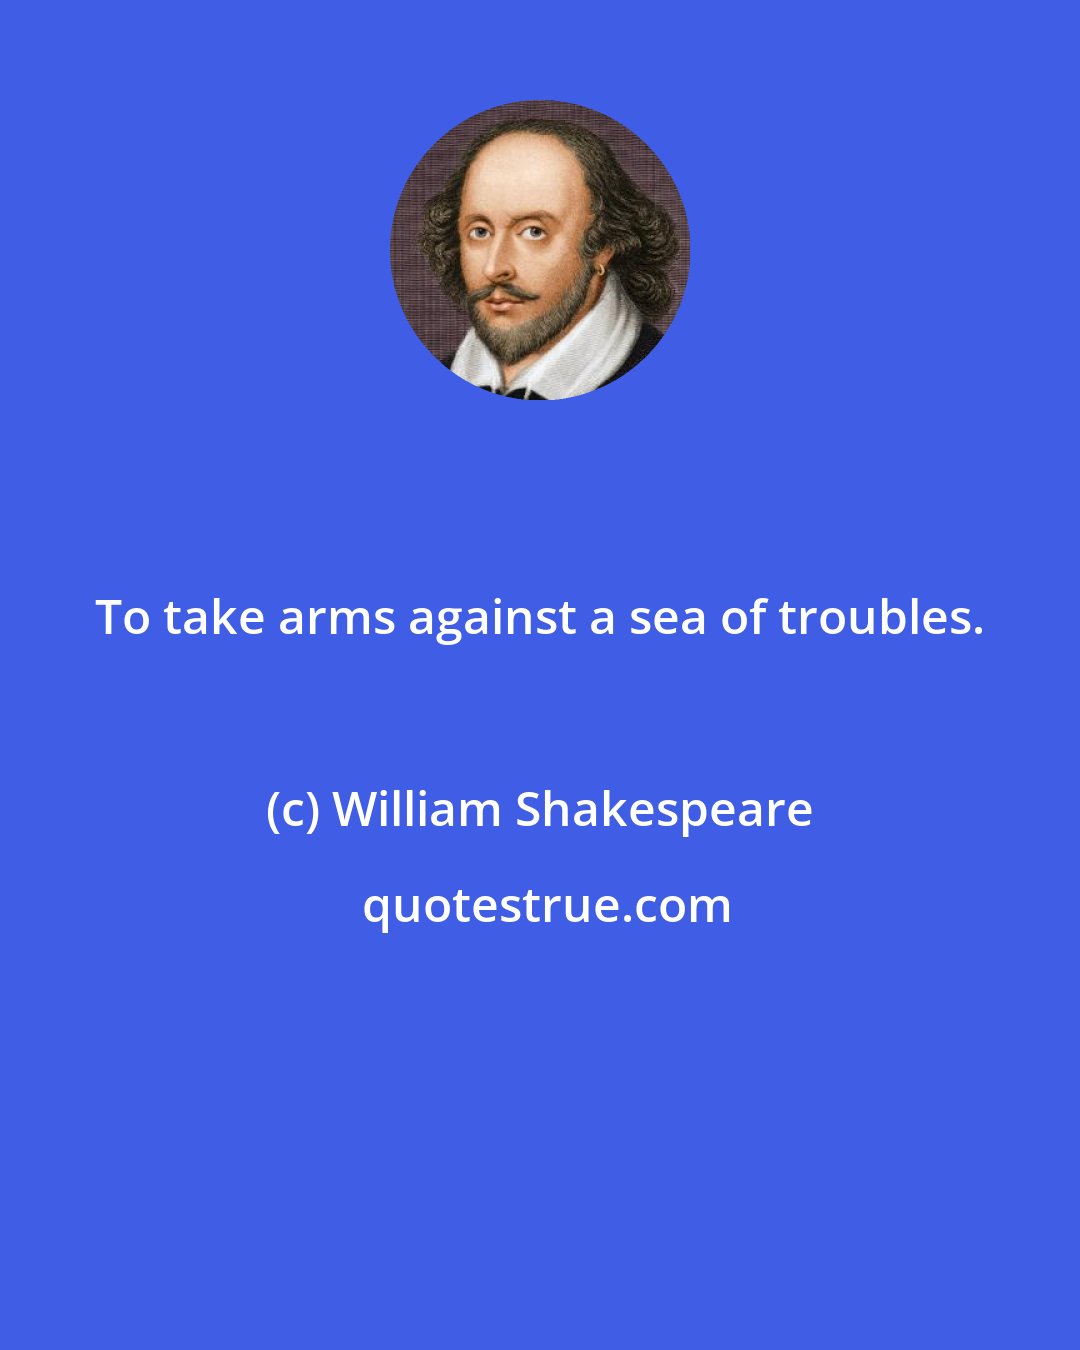 William Shakespeare: To take arms against a sea of troubles.